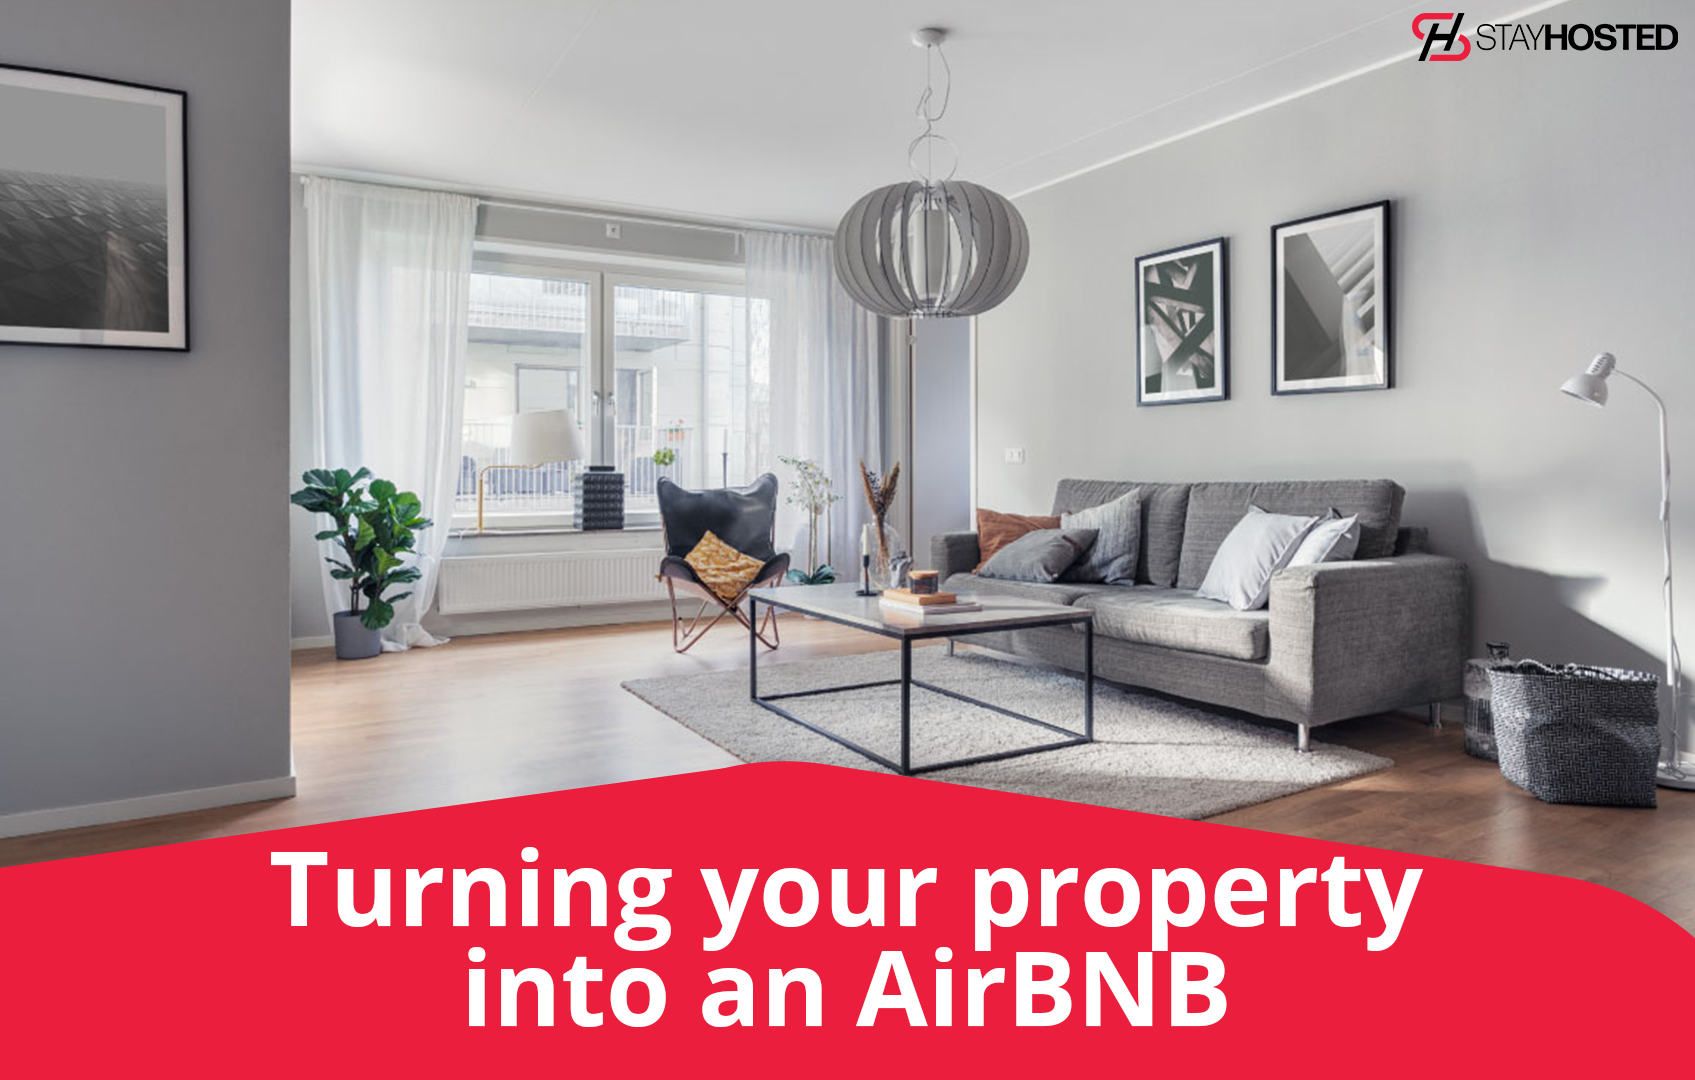 How to turn a property into an airbnb